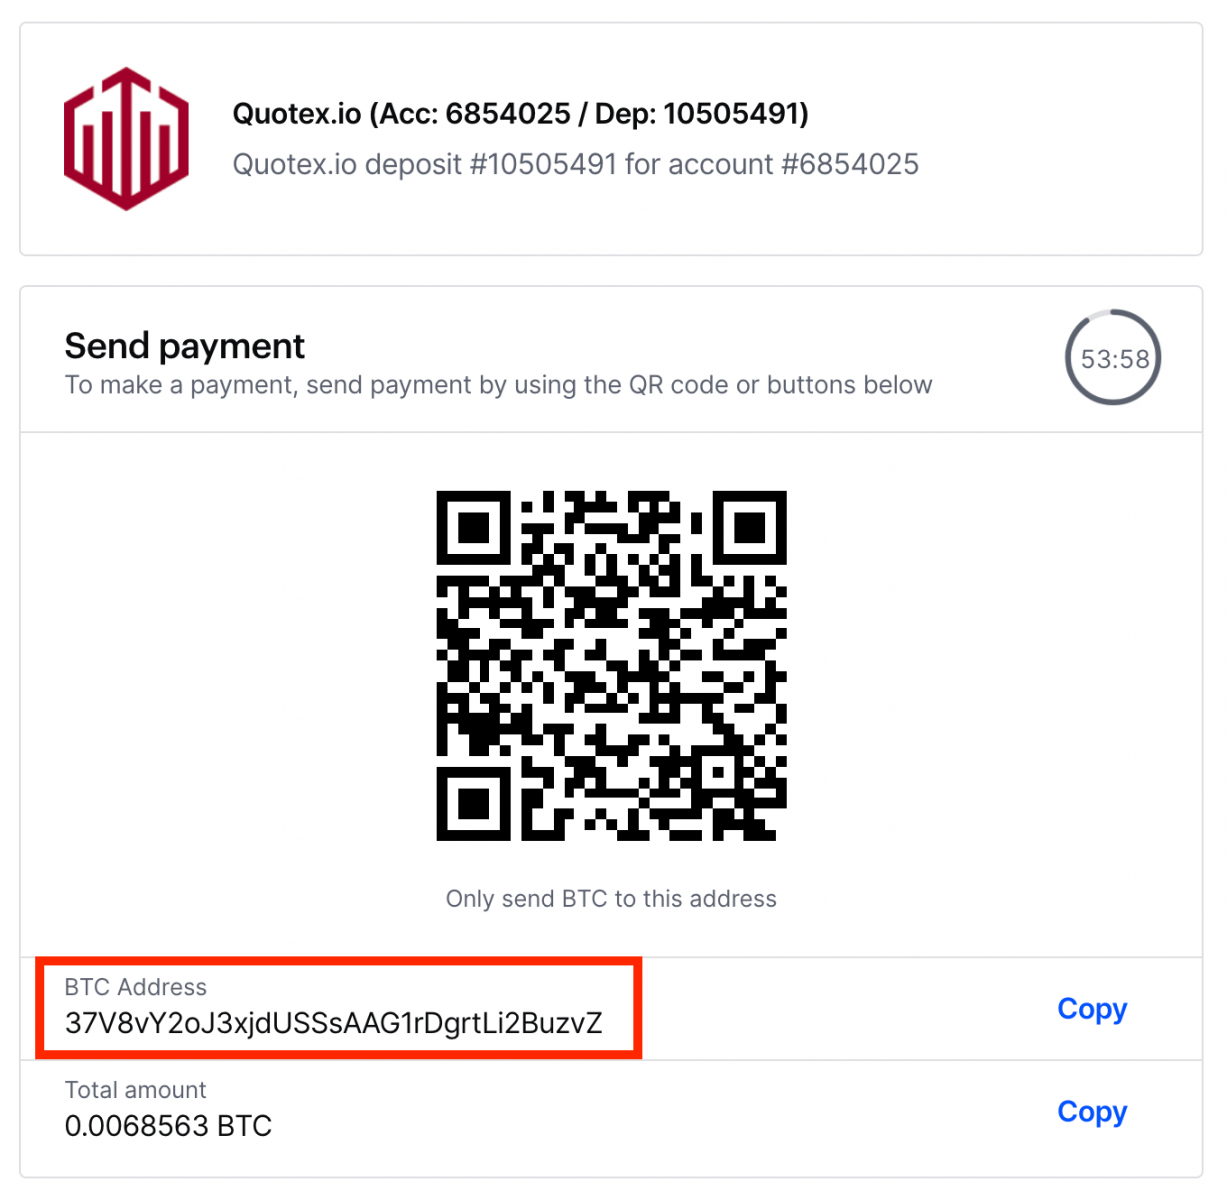 Deposit Money in Quotex via Colombia Bank Cards (Visa / MasterCard), E-payments (Perfect Money, Efecty, Movilred, PSE, Puntored, Baloto, Exito) and Cryptocurrencies